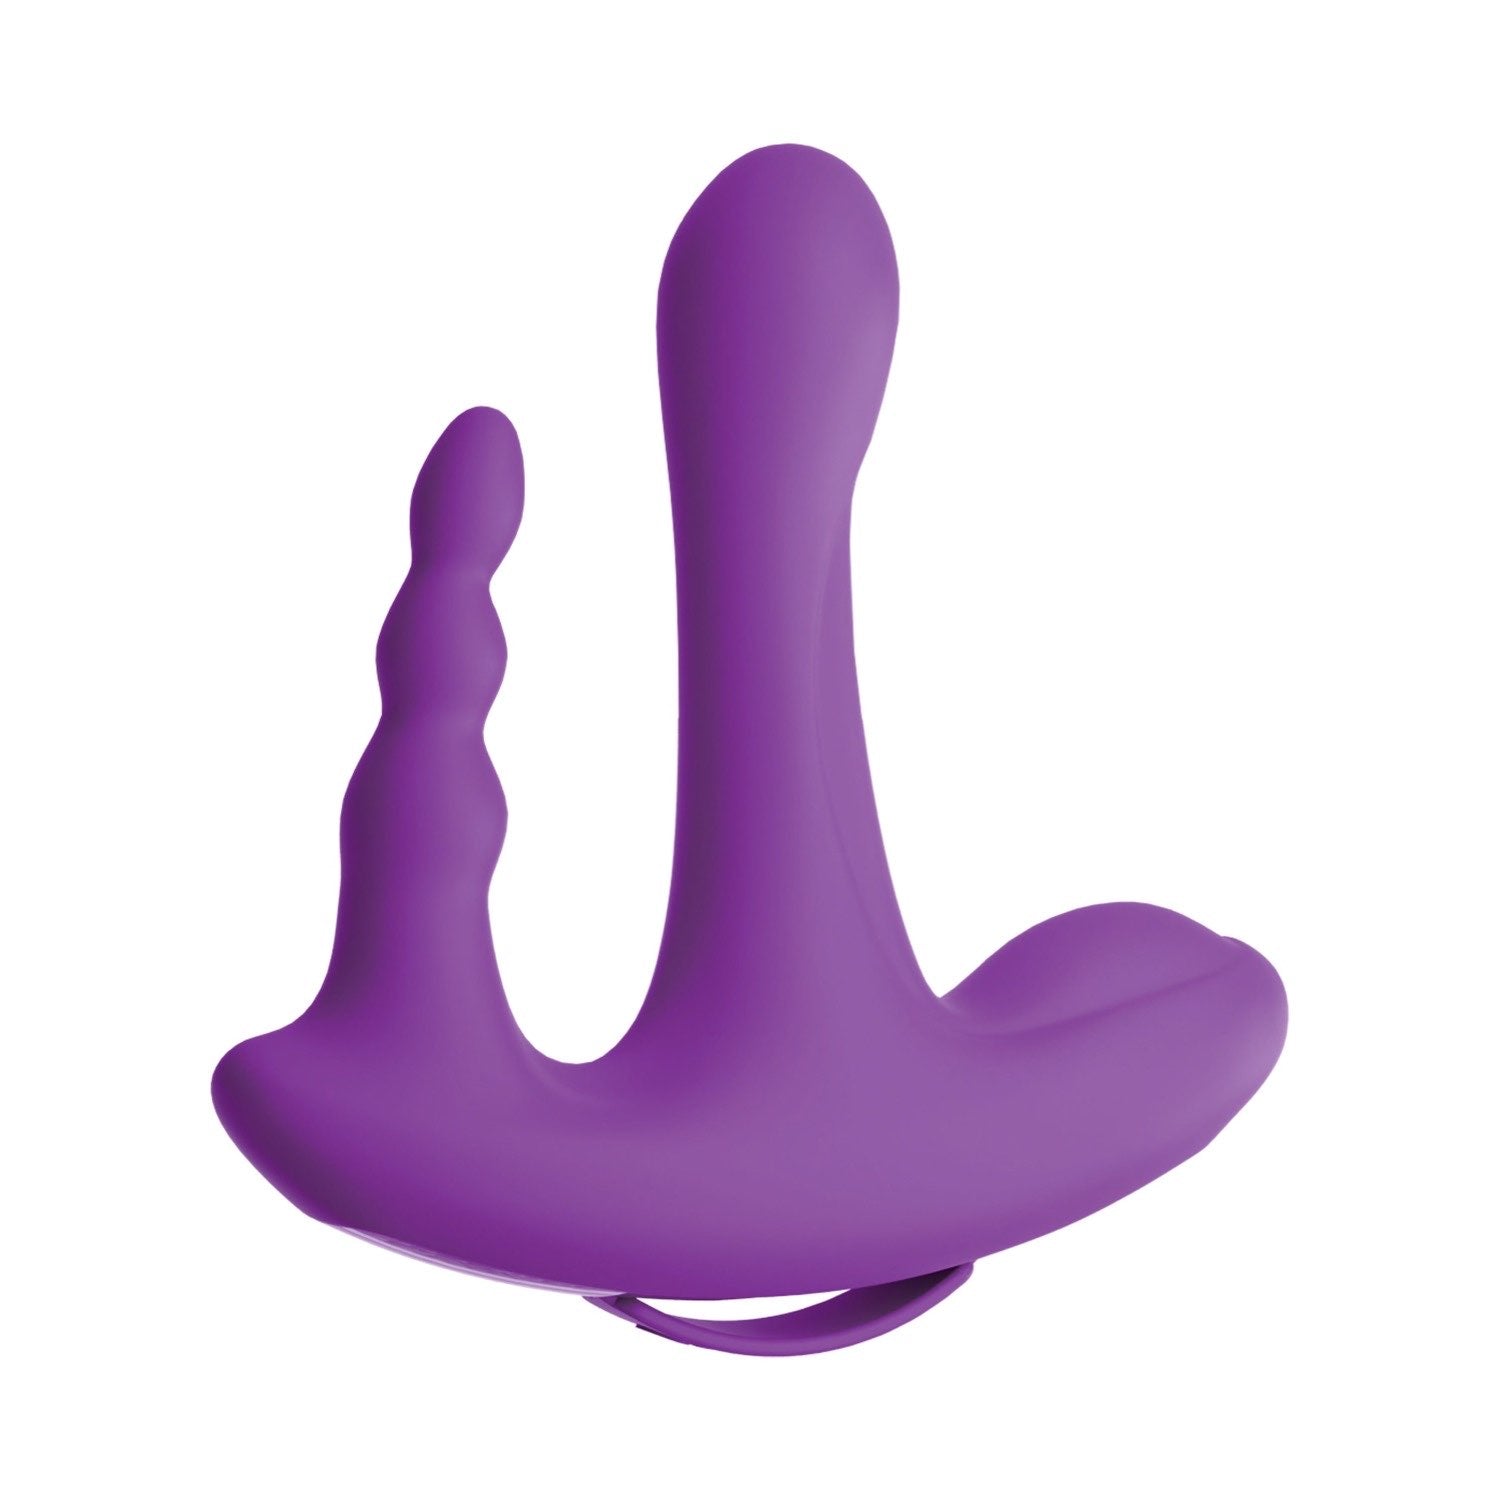 3Some Rock N Ride - Purple USB Rechargeable Stimulator with Wireless Remote by Pipedream